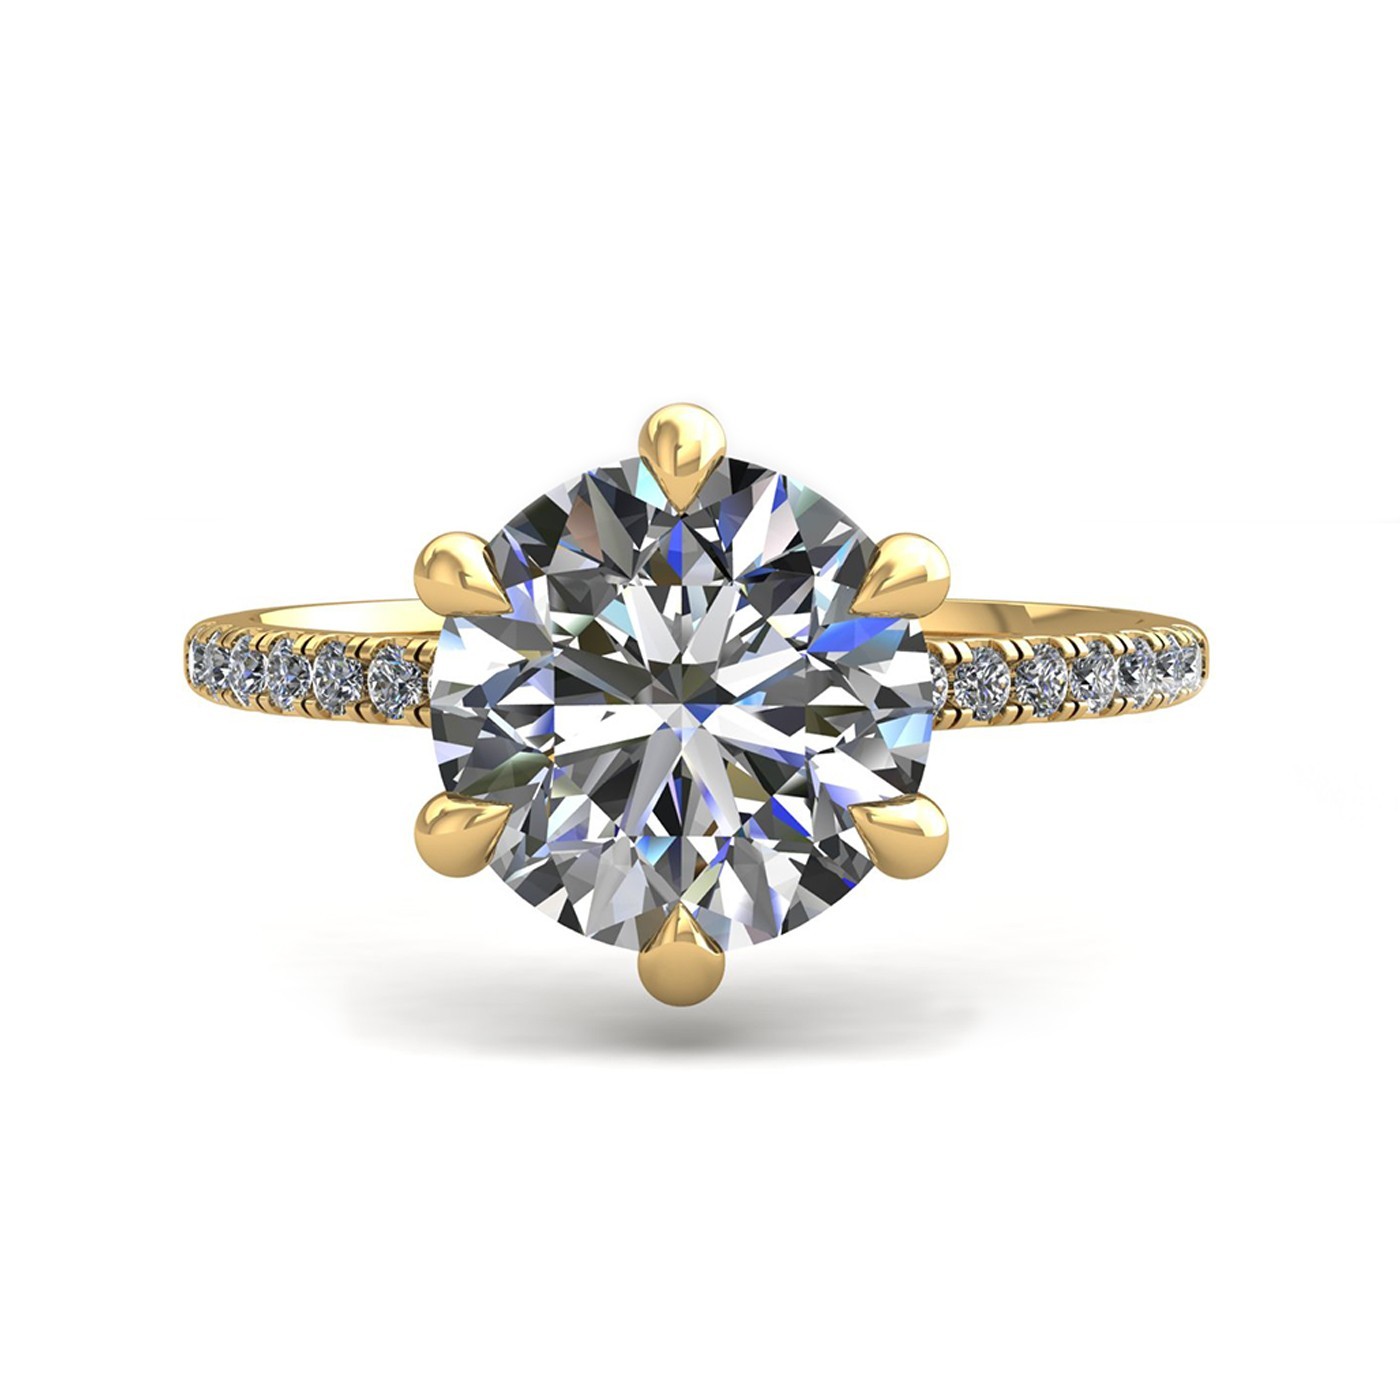 18k yellow gold 0,80 ct 6 prongs round cut diamond engagement ring with whisper thin pavÉ set band Photos & images